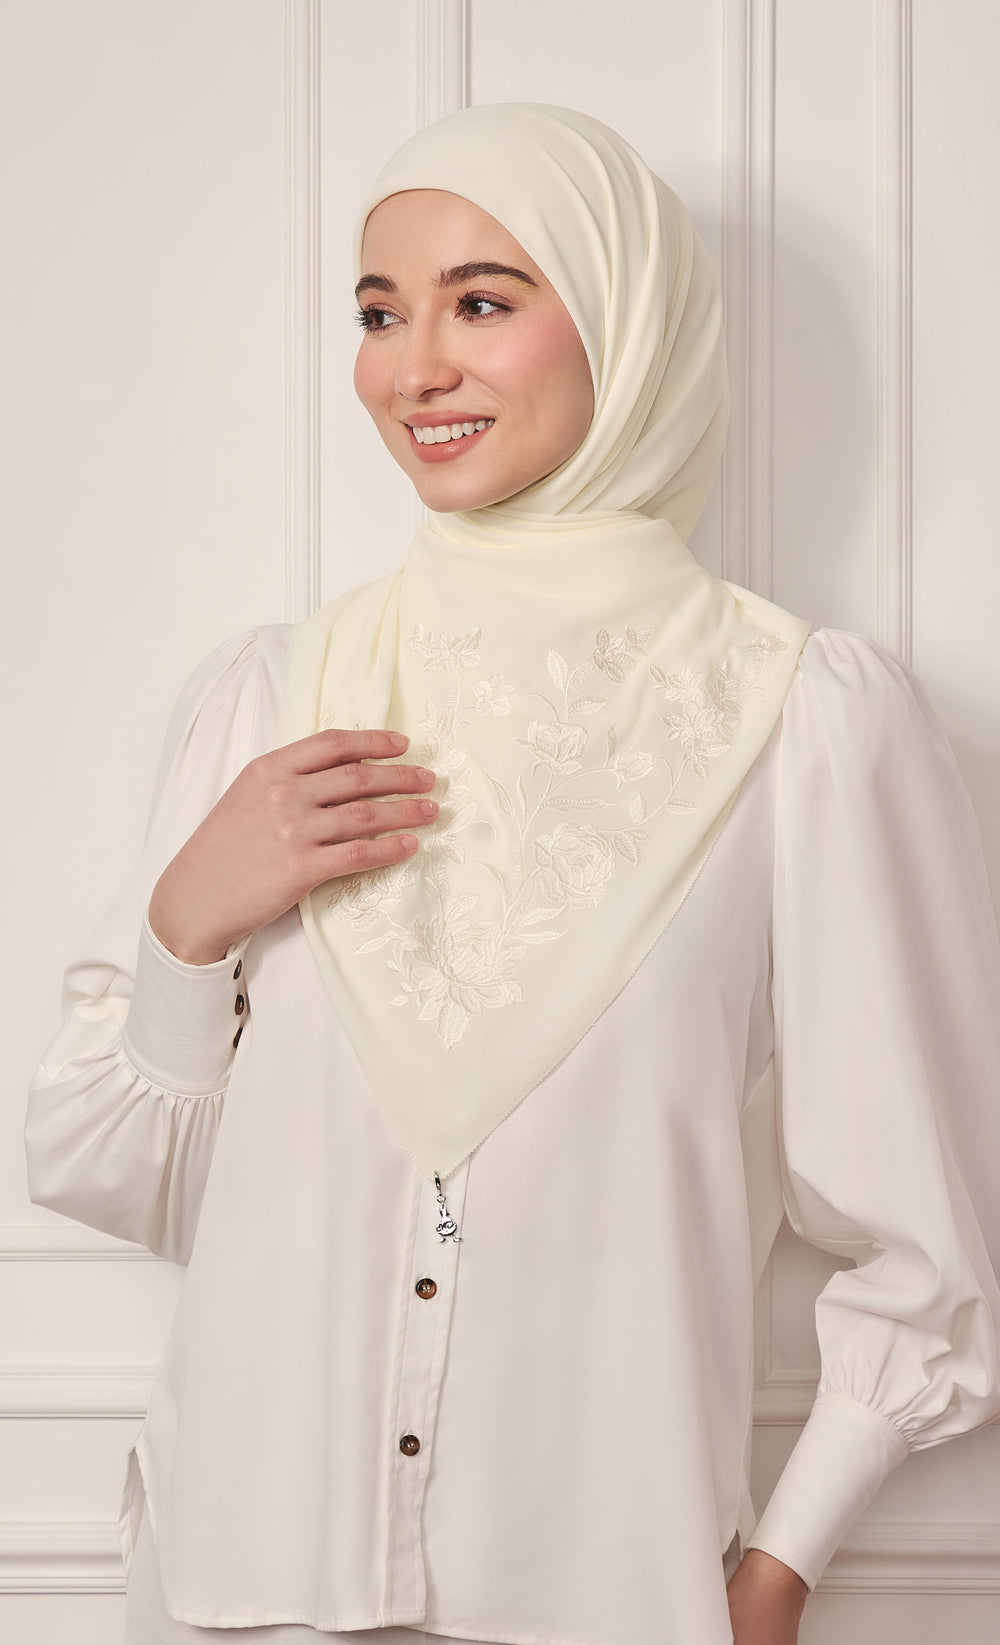 The Peonies Embroidery dUCk Square Scarf in White